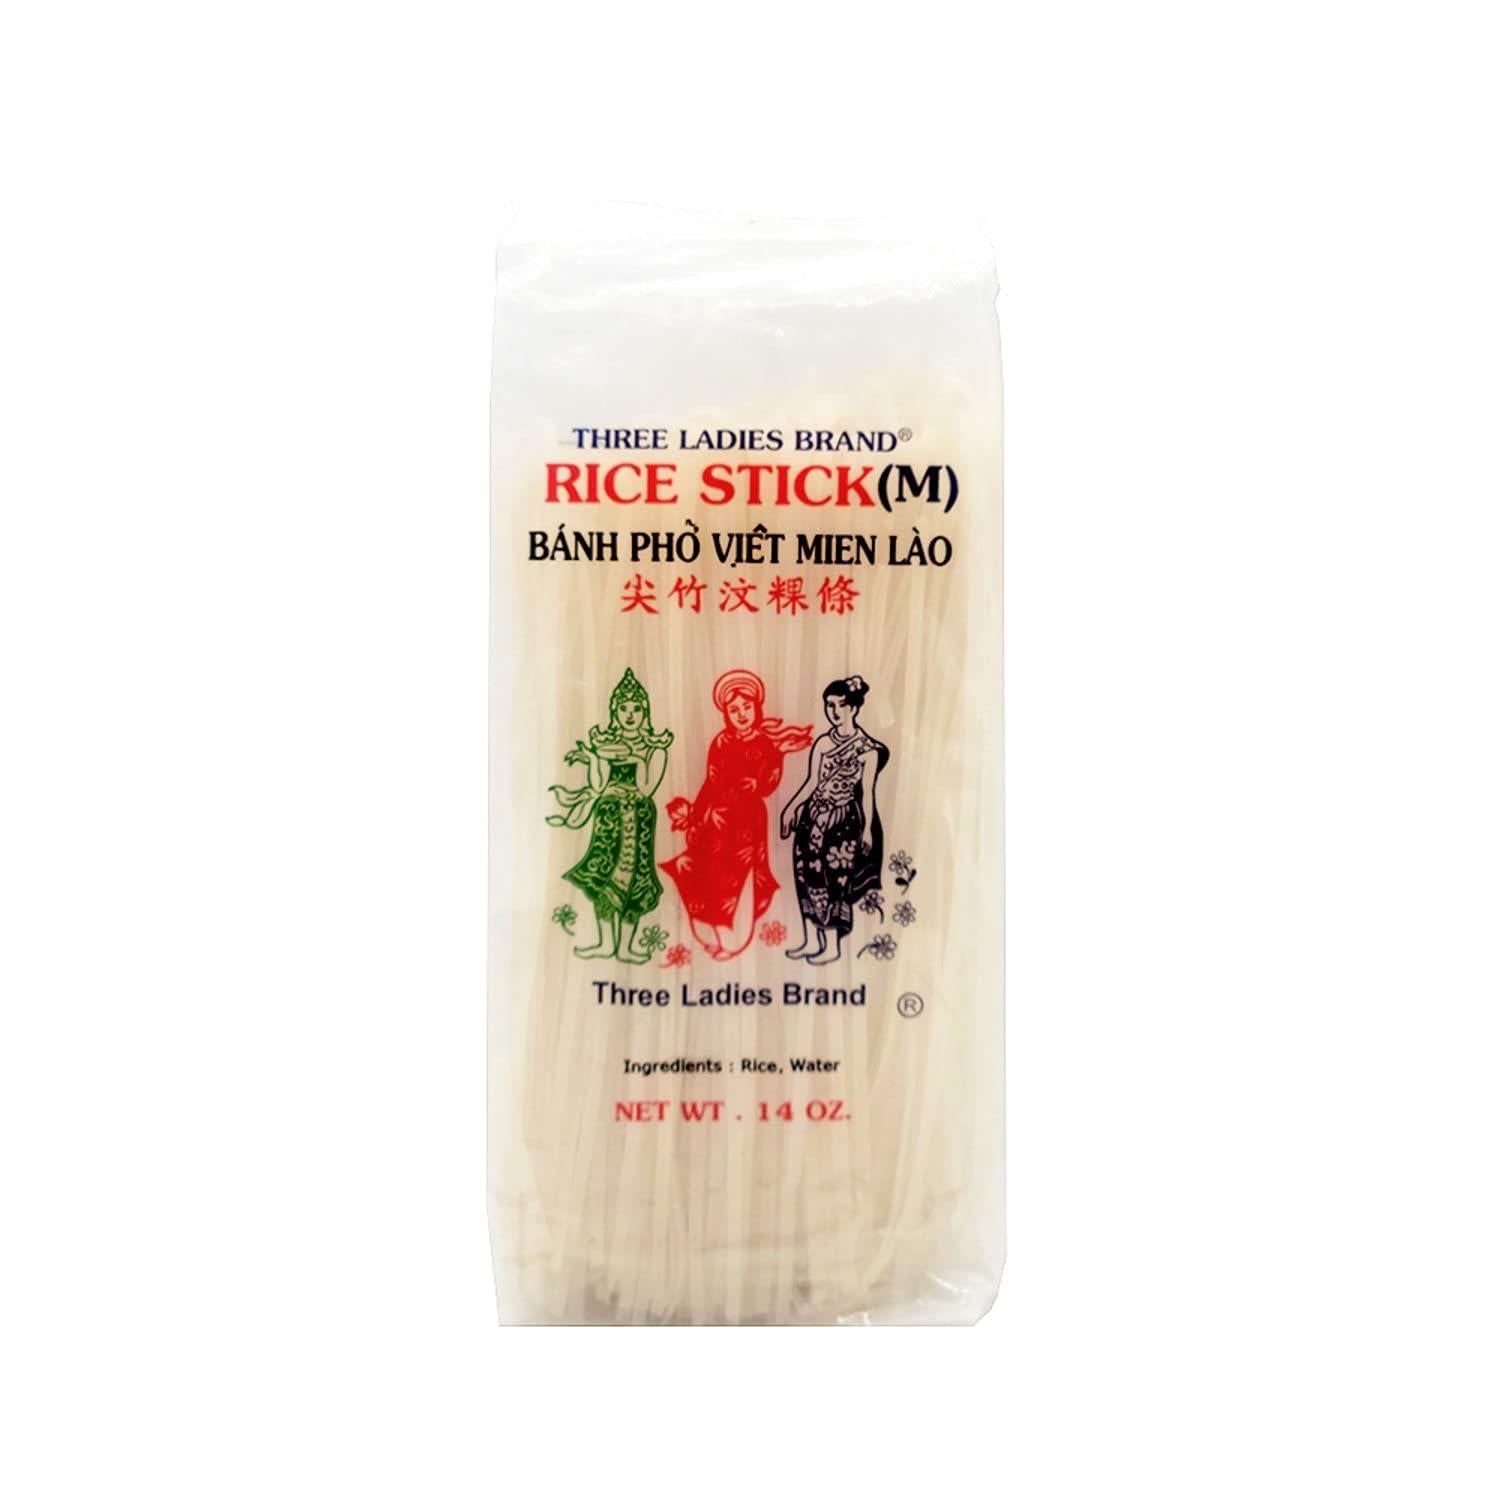 Three Ladies Brand Rice Stick Noodle - 14 Oz. (Pack of 3 Bags) - SET OF 2